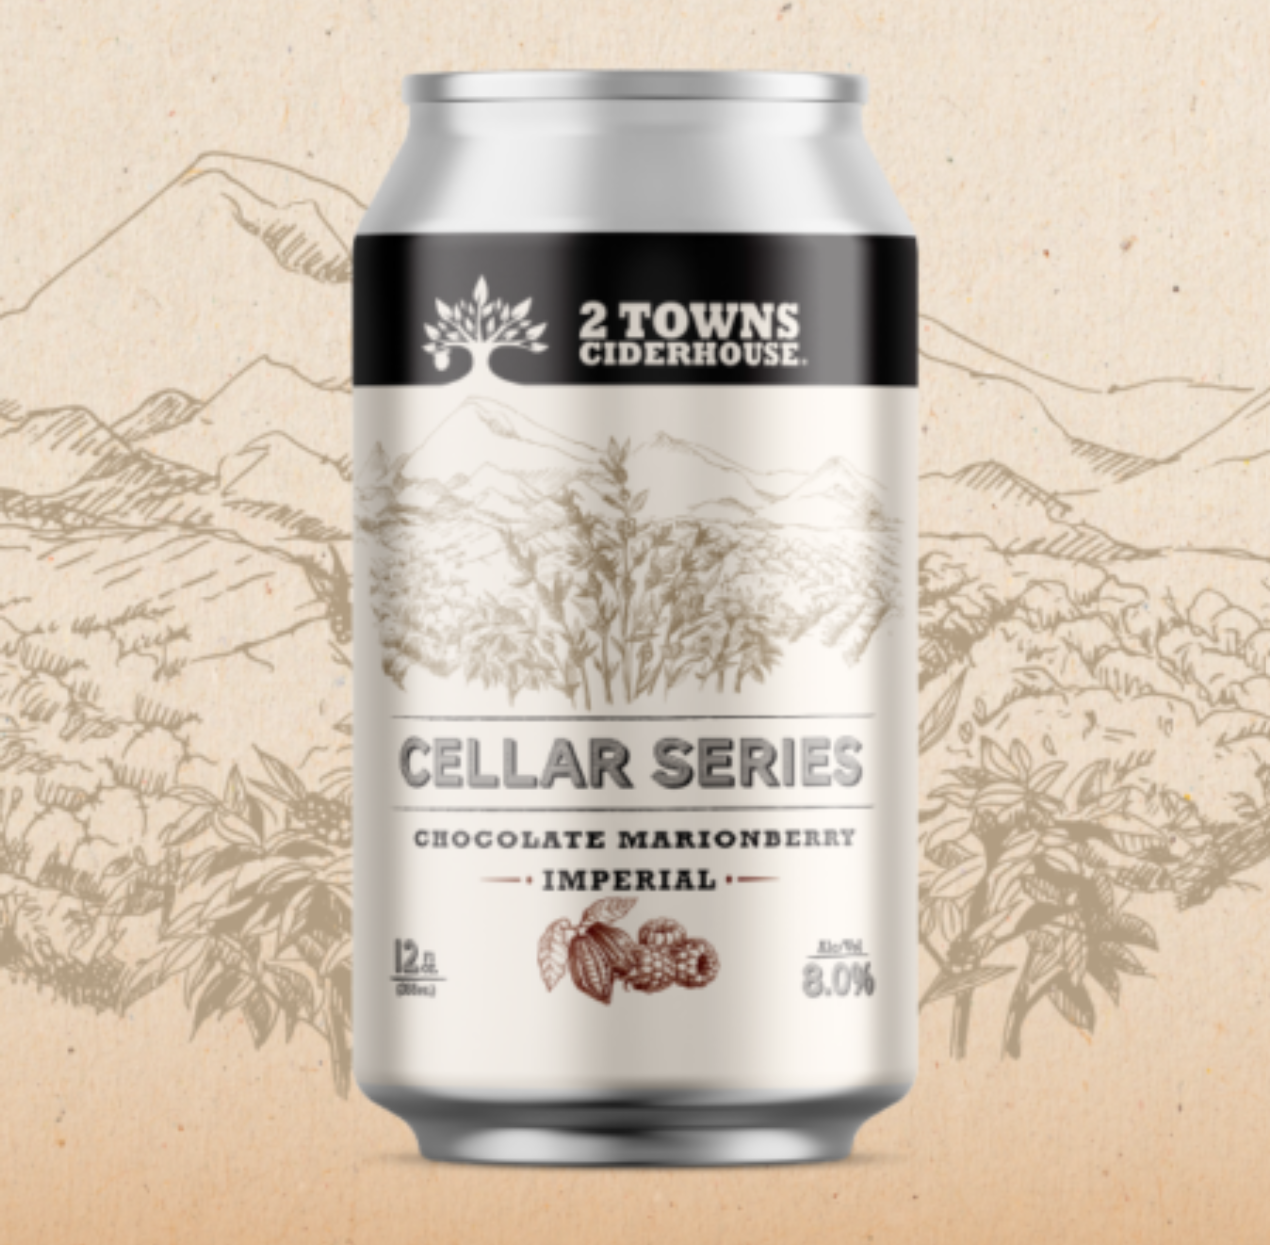 COLLABORATION WITH 2 TOWNS CIDERHOUSE: IRRESISTIBLY SILKY AND SEDUCTIVE CELLAR SERIES IMPERIAL CHOCOLATE MARIONBERRY